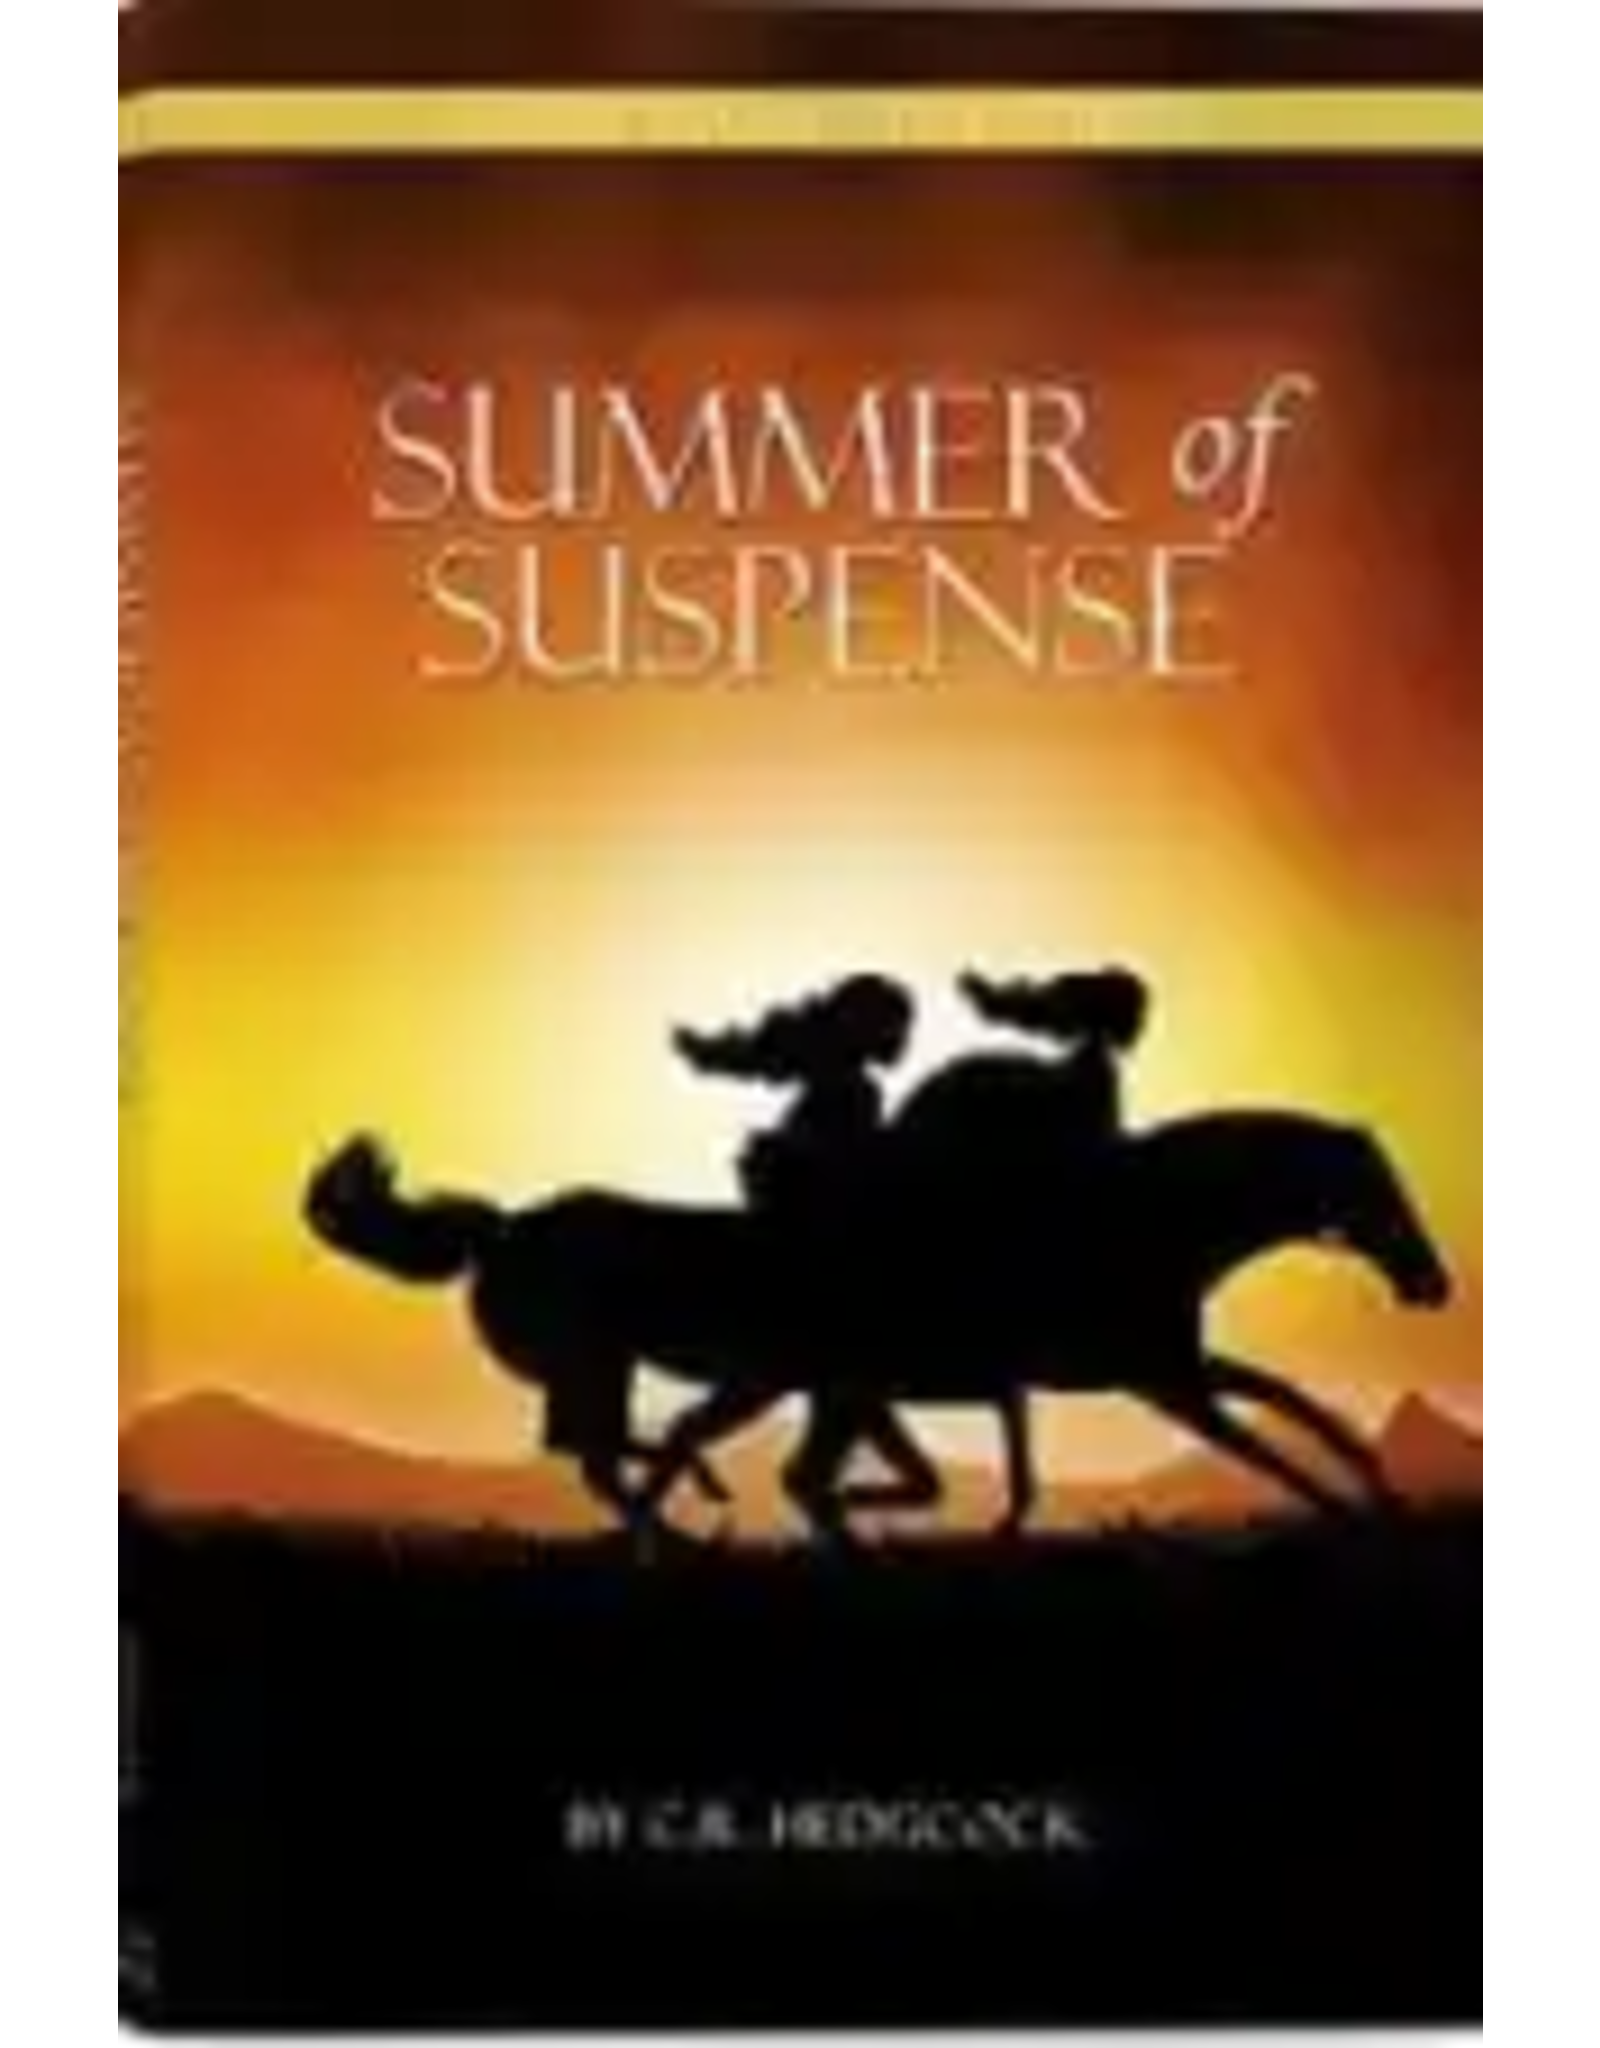 C.R. Hedgcock Summer of Suspense  - Book 1 (Baker Family Adventures)